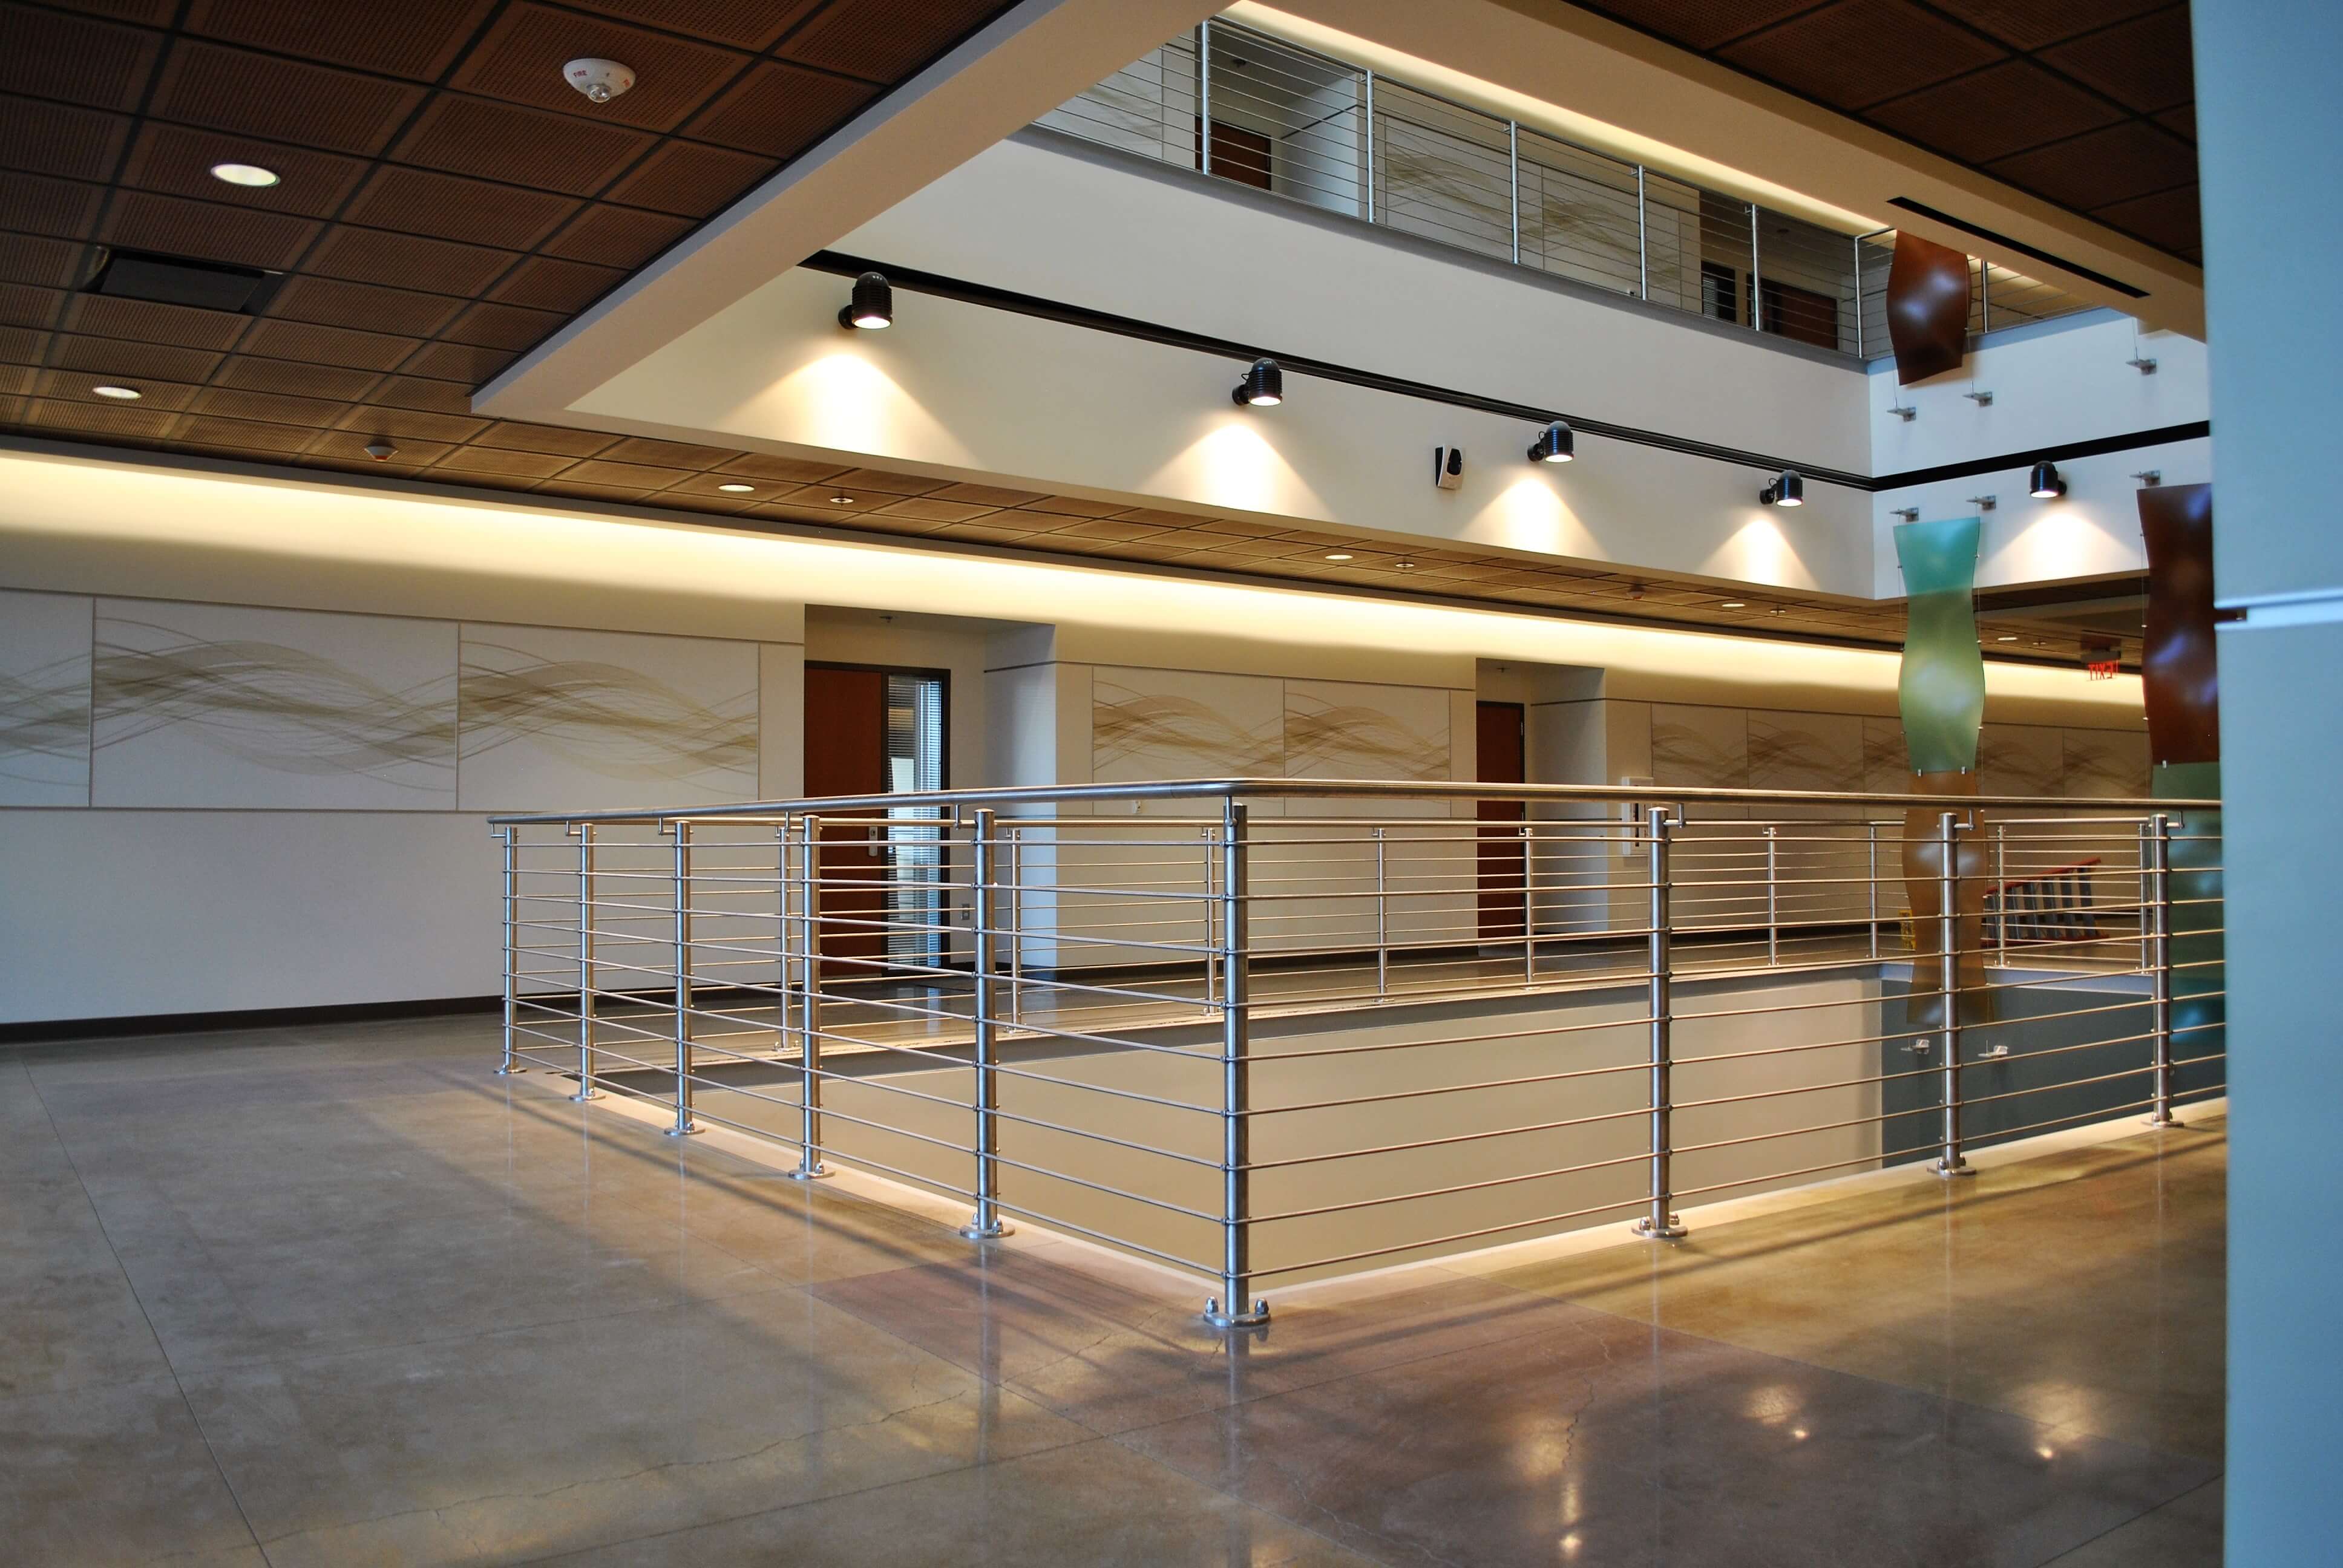 Circum round guardrail with stainless steel infill rails at Mission College, CA.